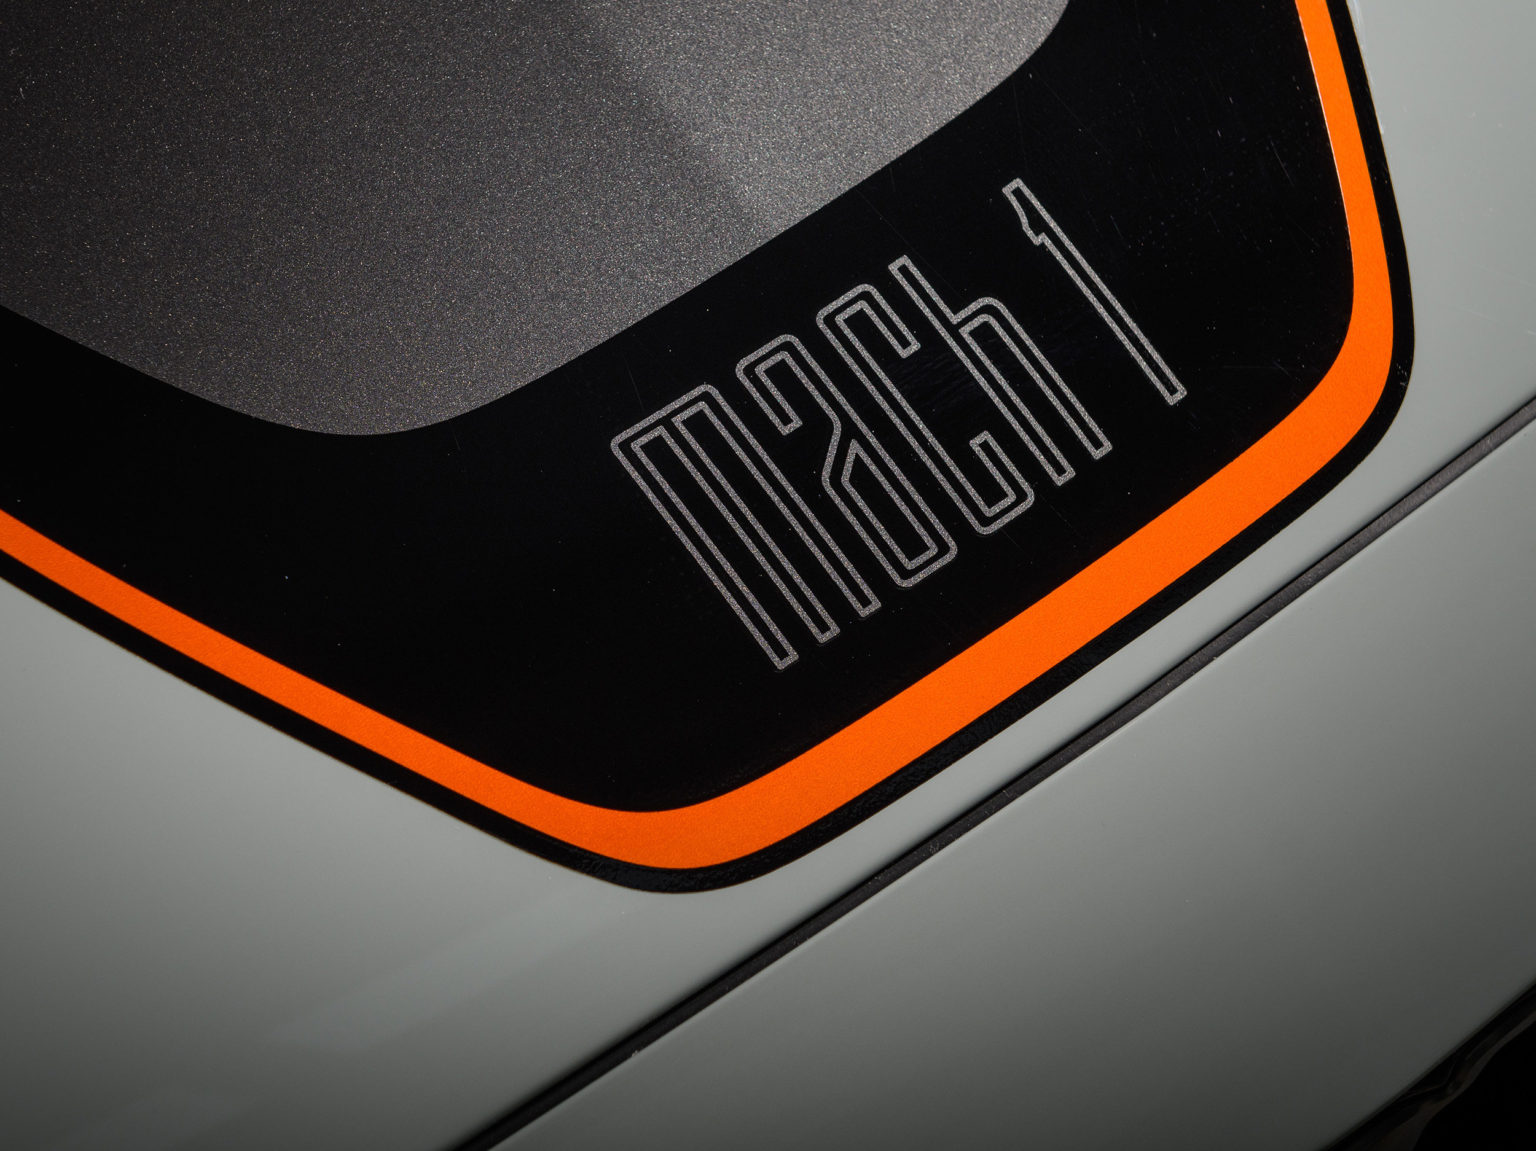 Ford has redesigned the Mach 1 logo for the 2021 Mustang.